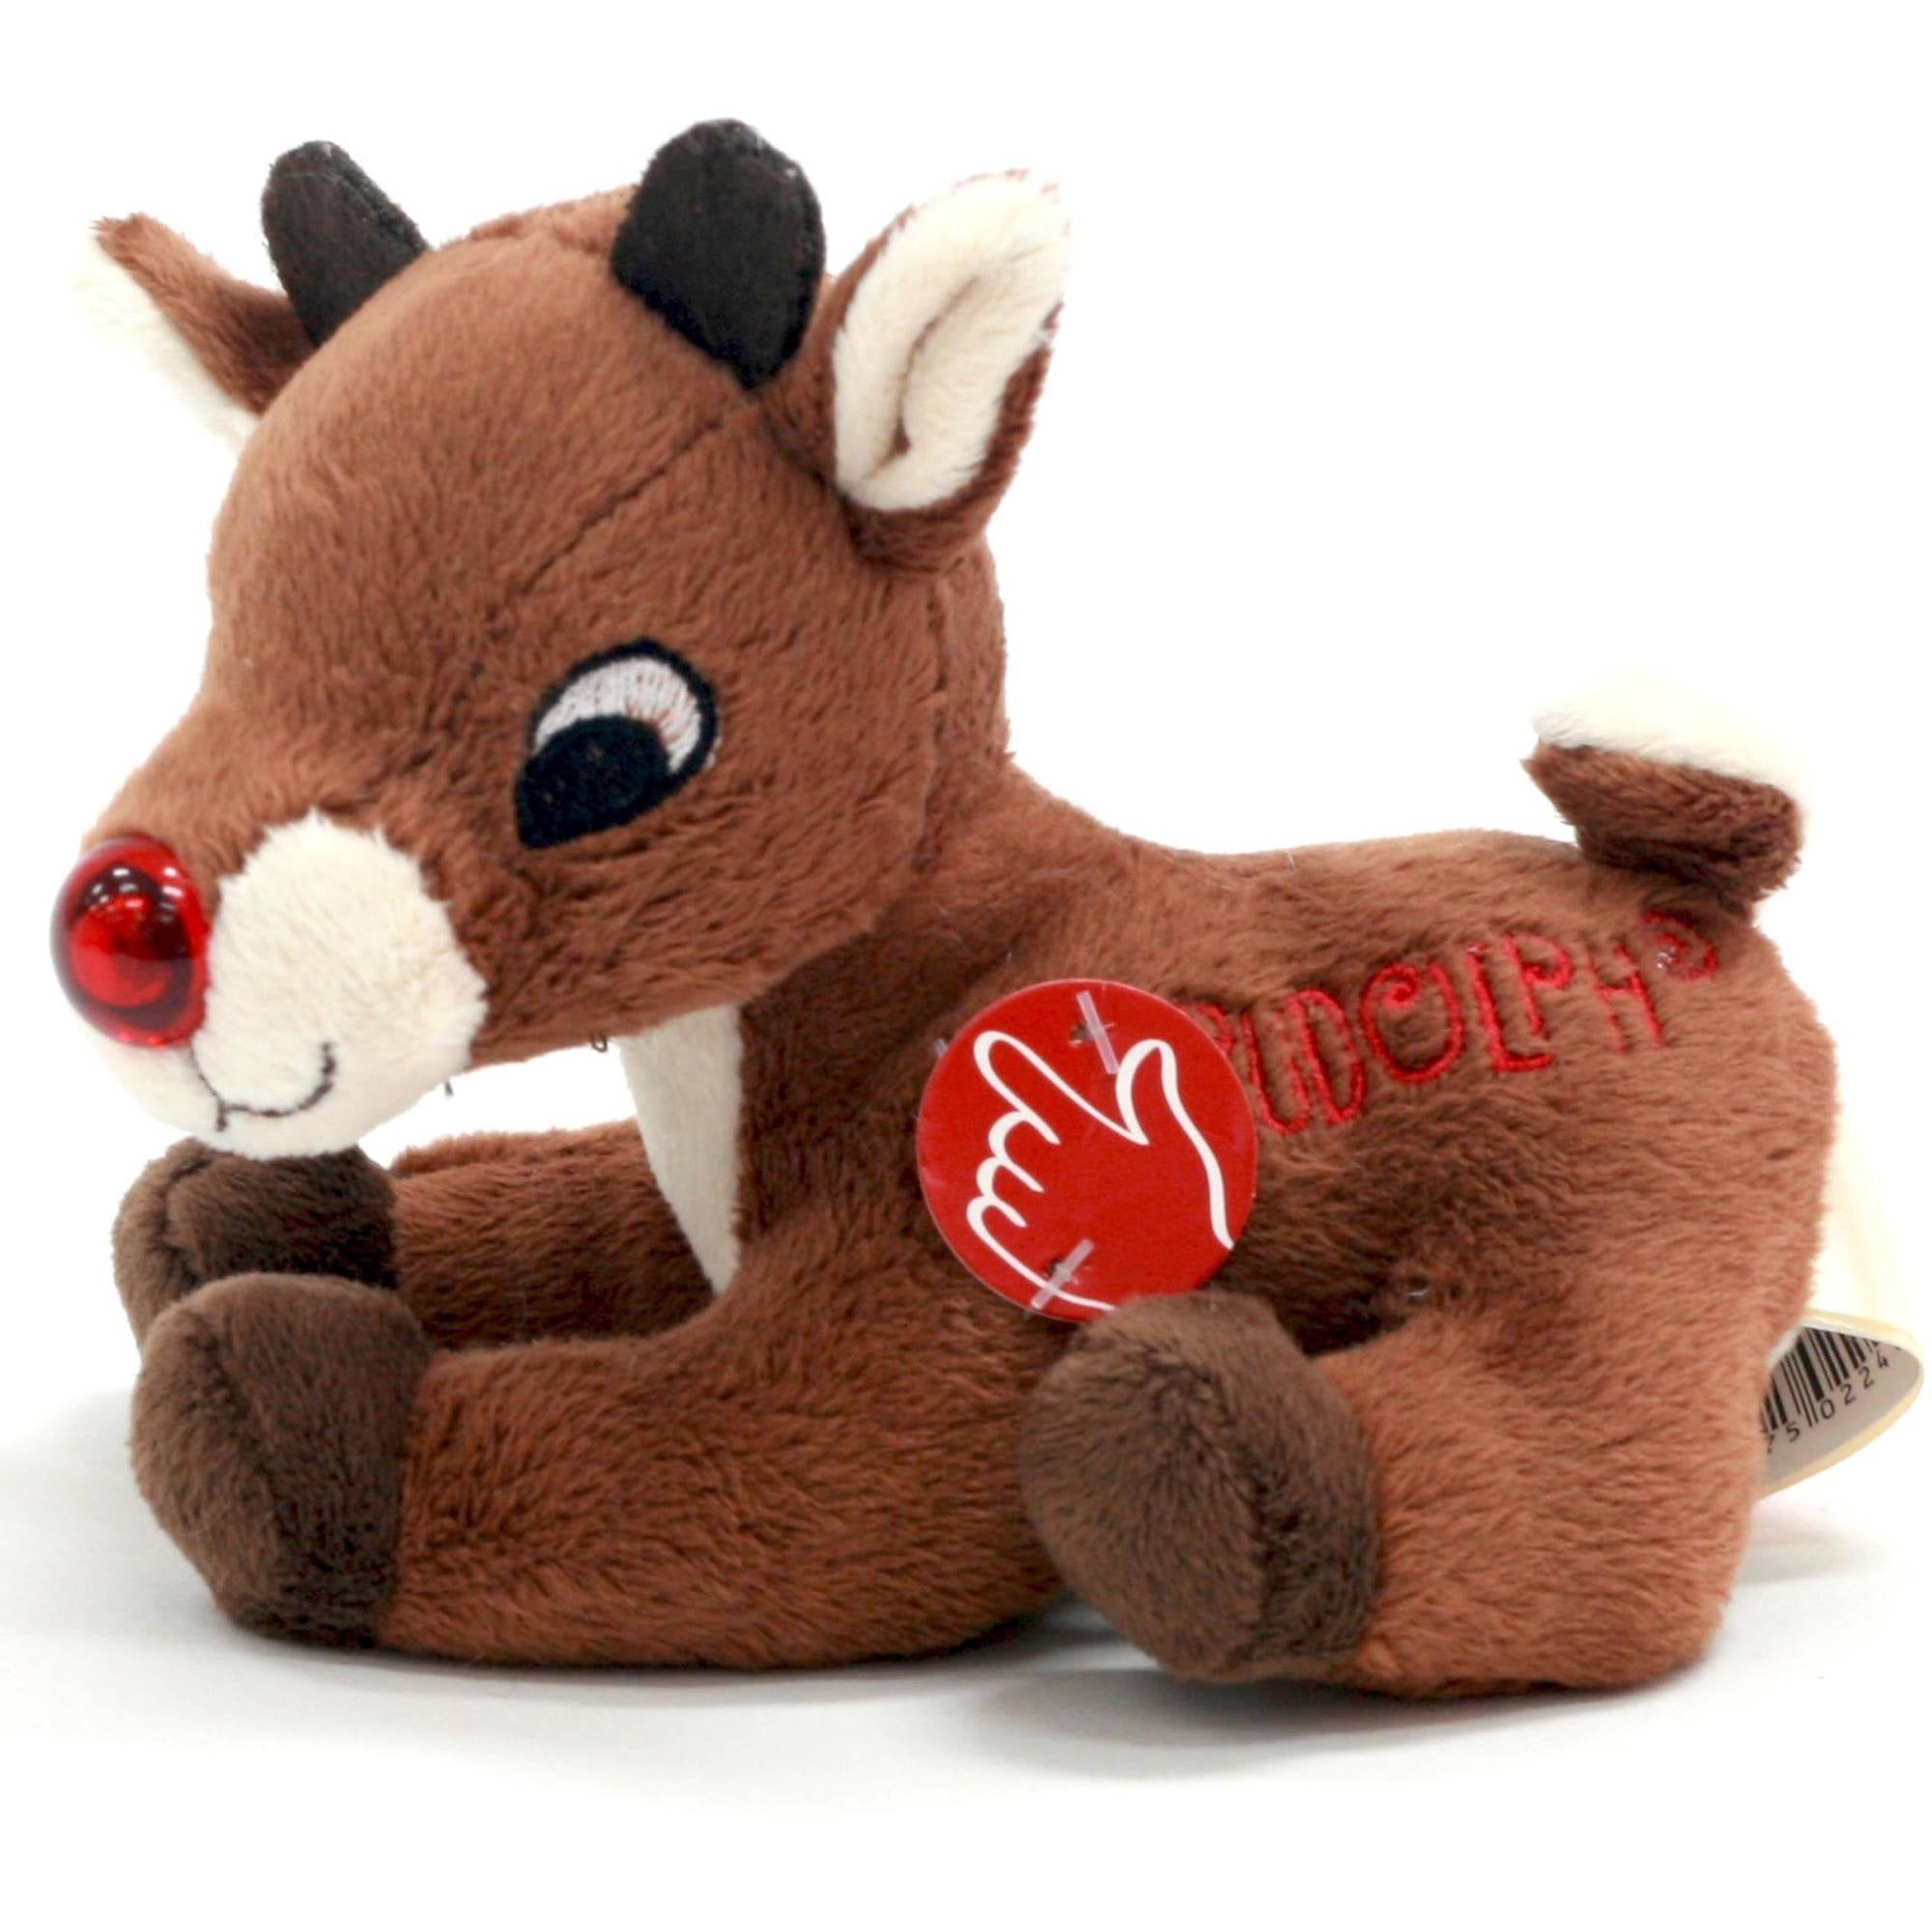 Rudolph The Red Nosed Reindeer Musical Plush 4" Bean Bag Toy Dan Dee Collectors 